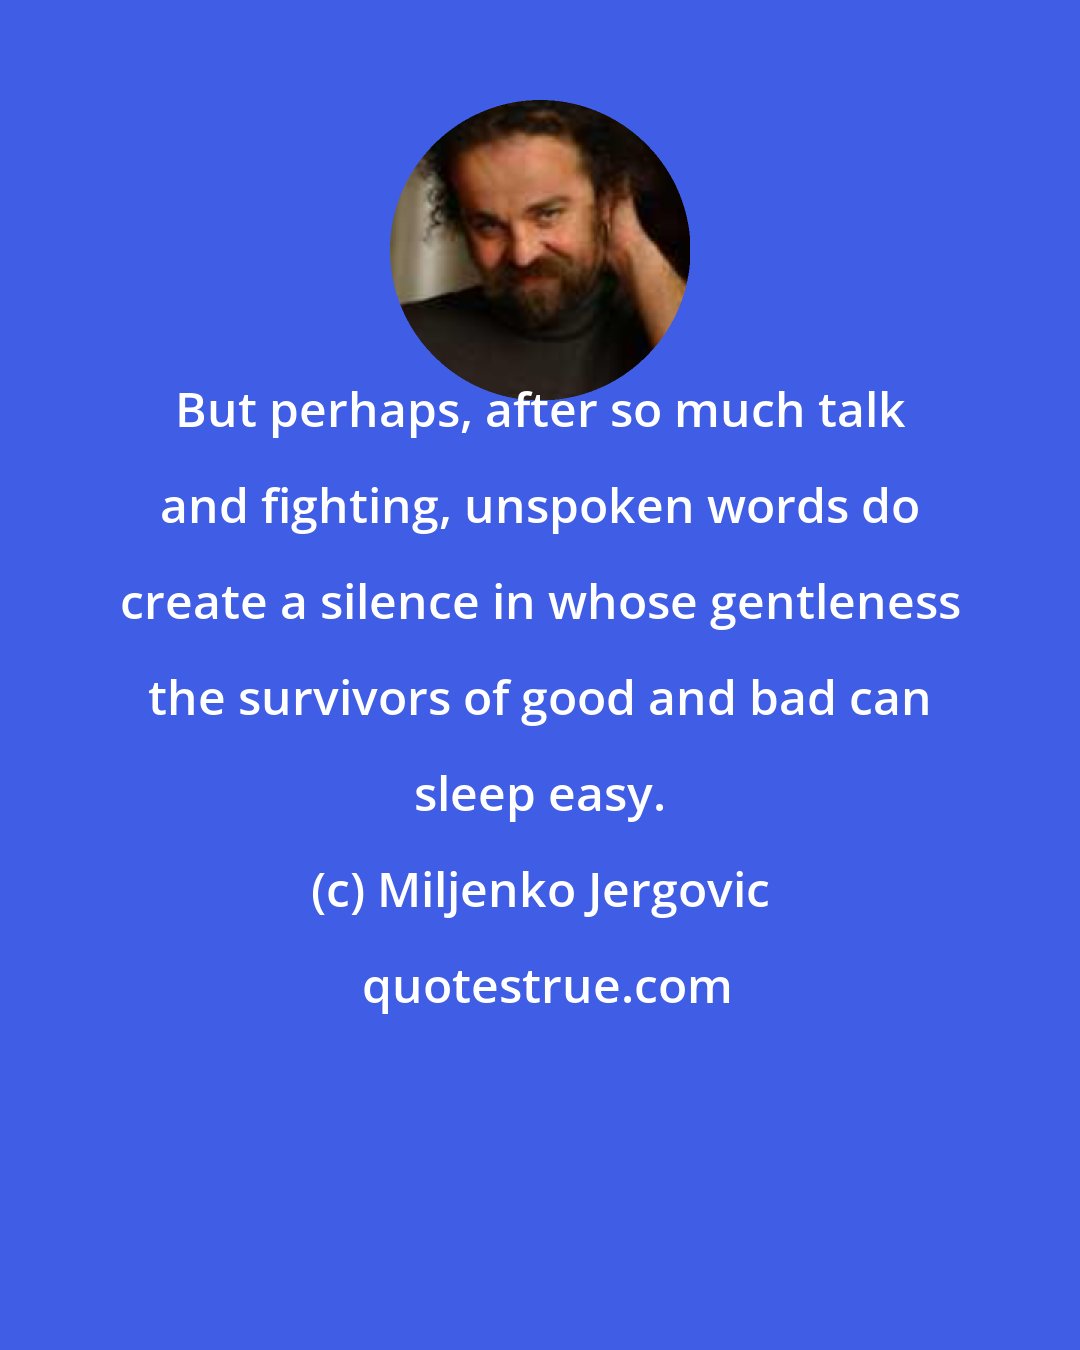 Miljenko Jergovic: But perhaps, after so much talk and fighting, unspoken words do create a silence in whose gentleness the survivors of good and bad can sleep easy.